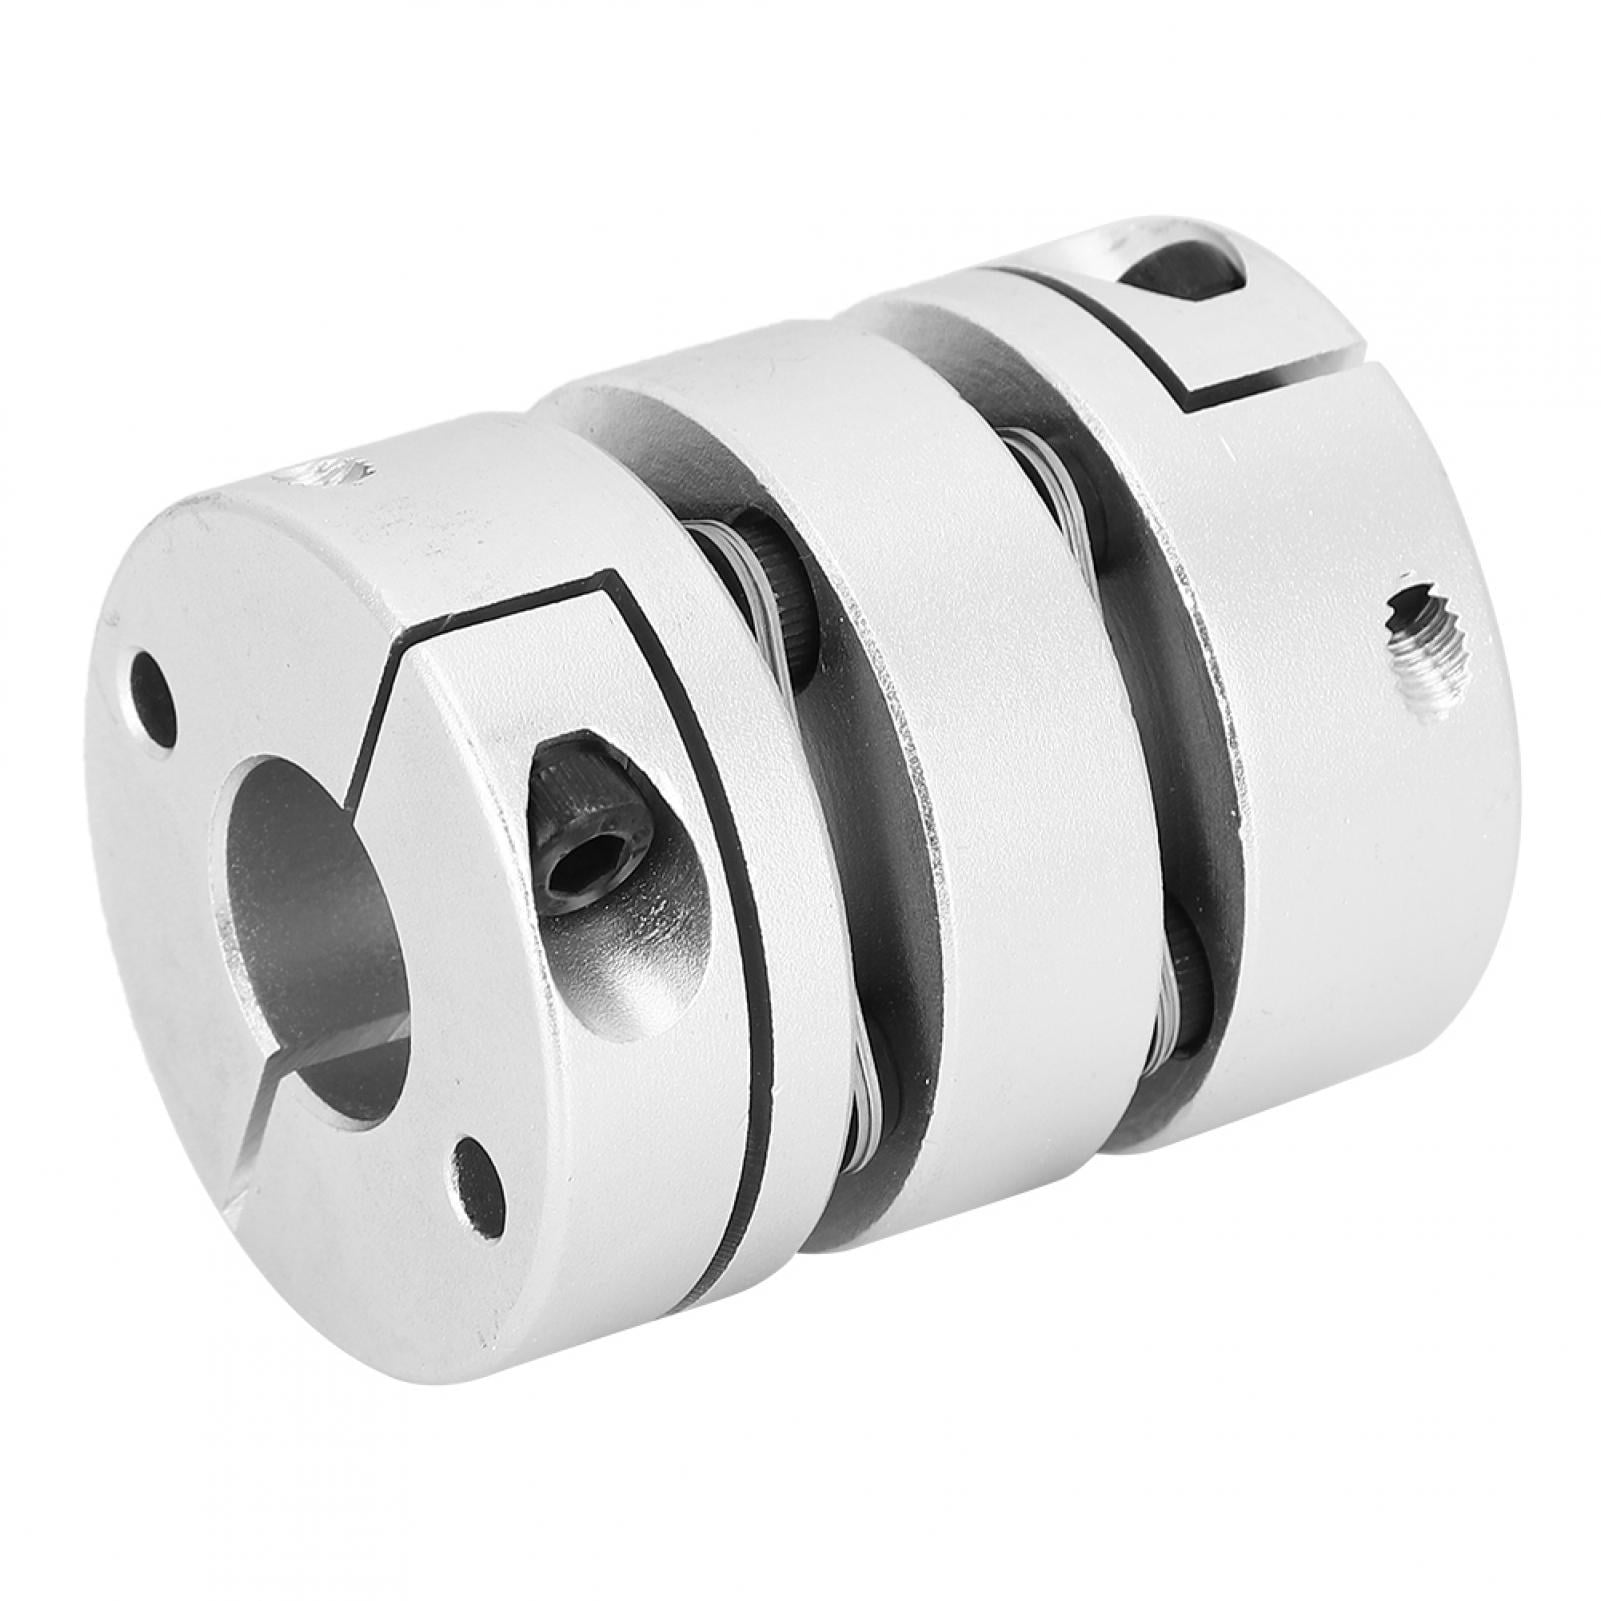 Aluminum Alloy Machinery Industries for Machining Center Lathes Industrial Application Functional Coupler Shaft Sleeve Coupling Motor Connector 